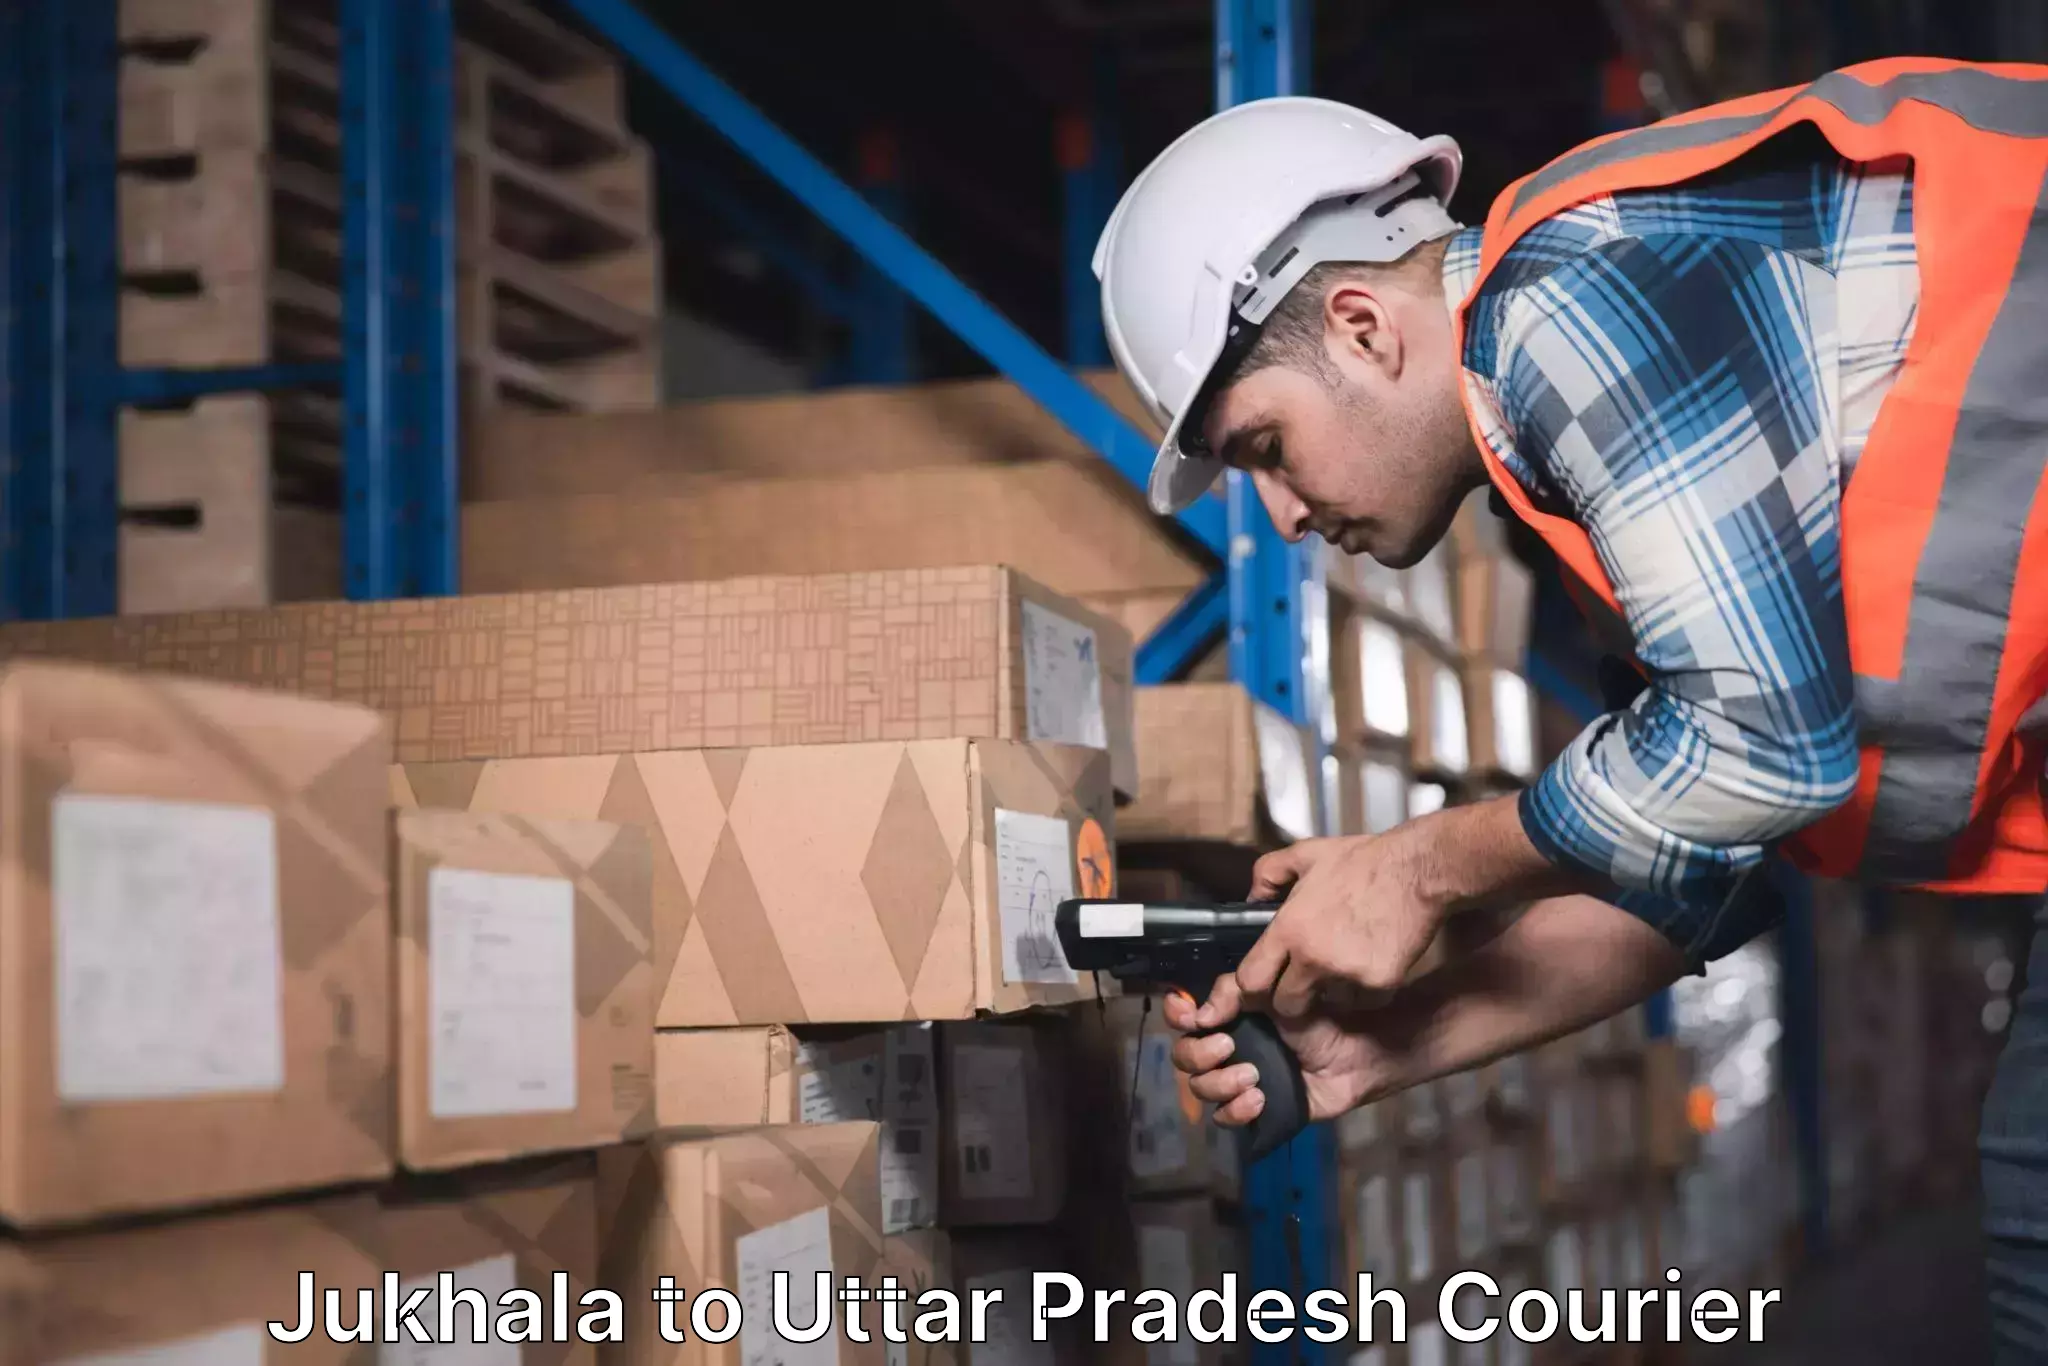 State-of-the-art courier technology Jukhala to Agra